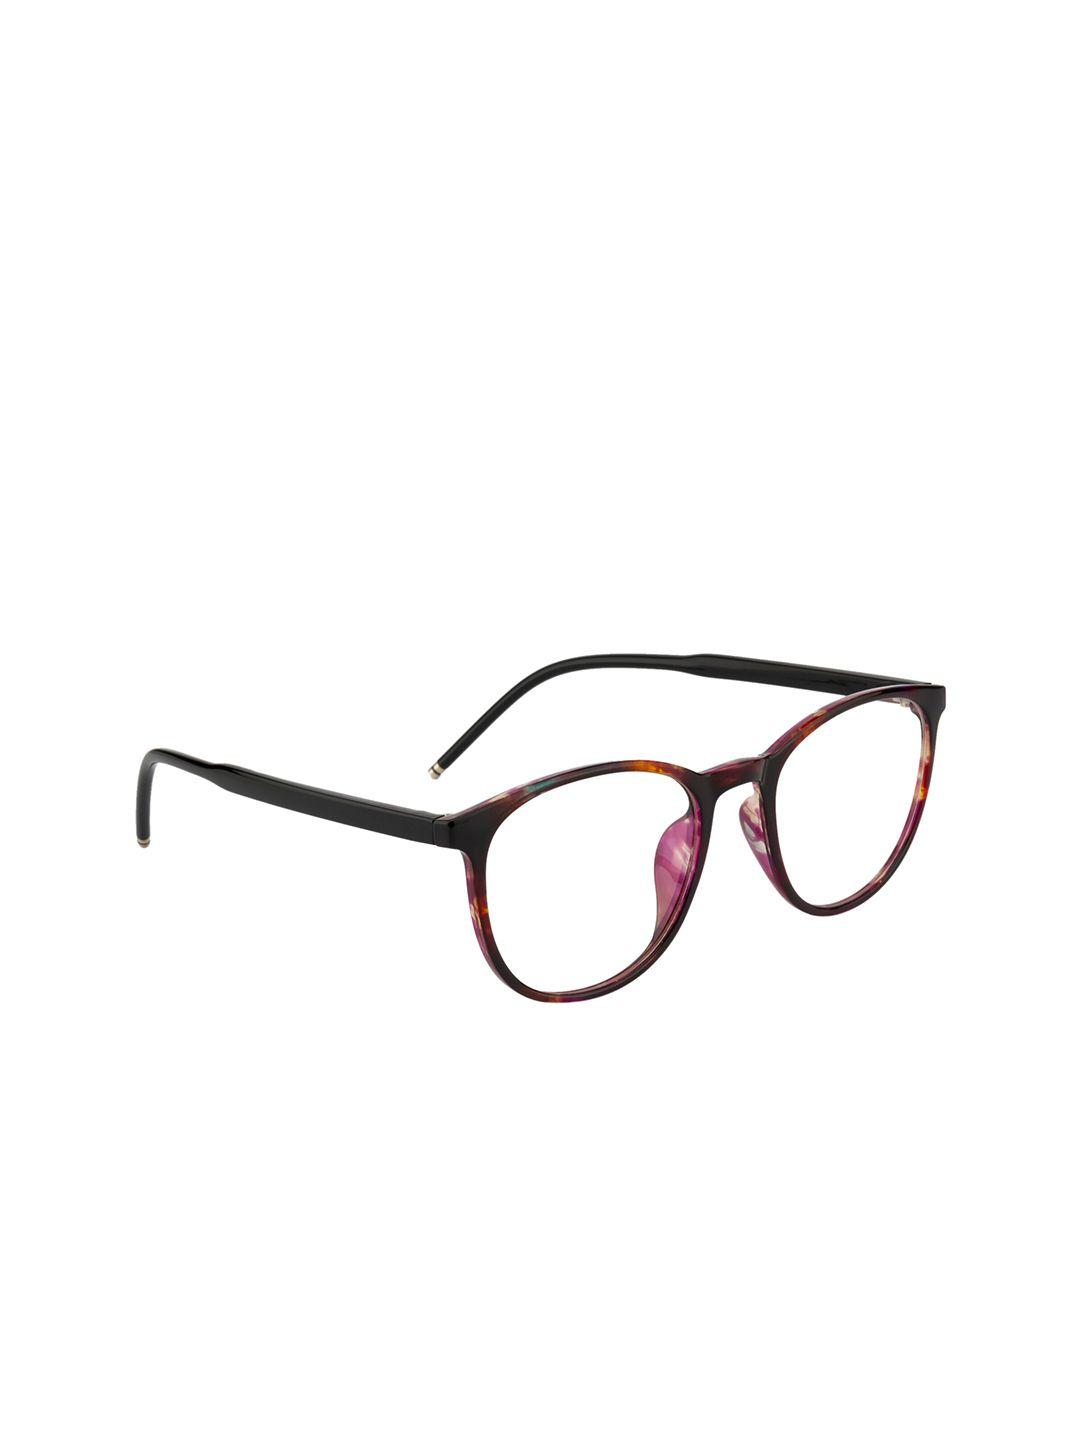 ted smith unisex brown & red full rim round frames